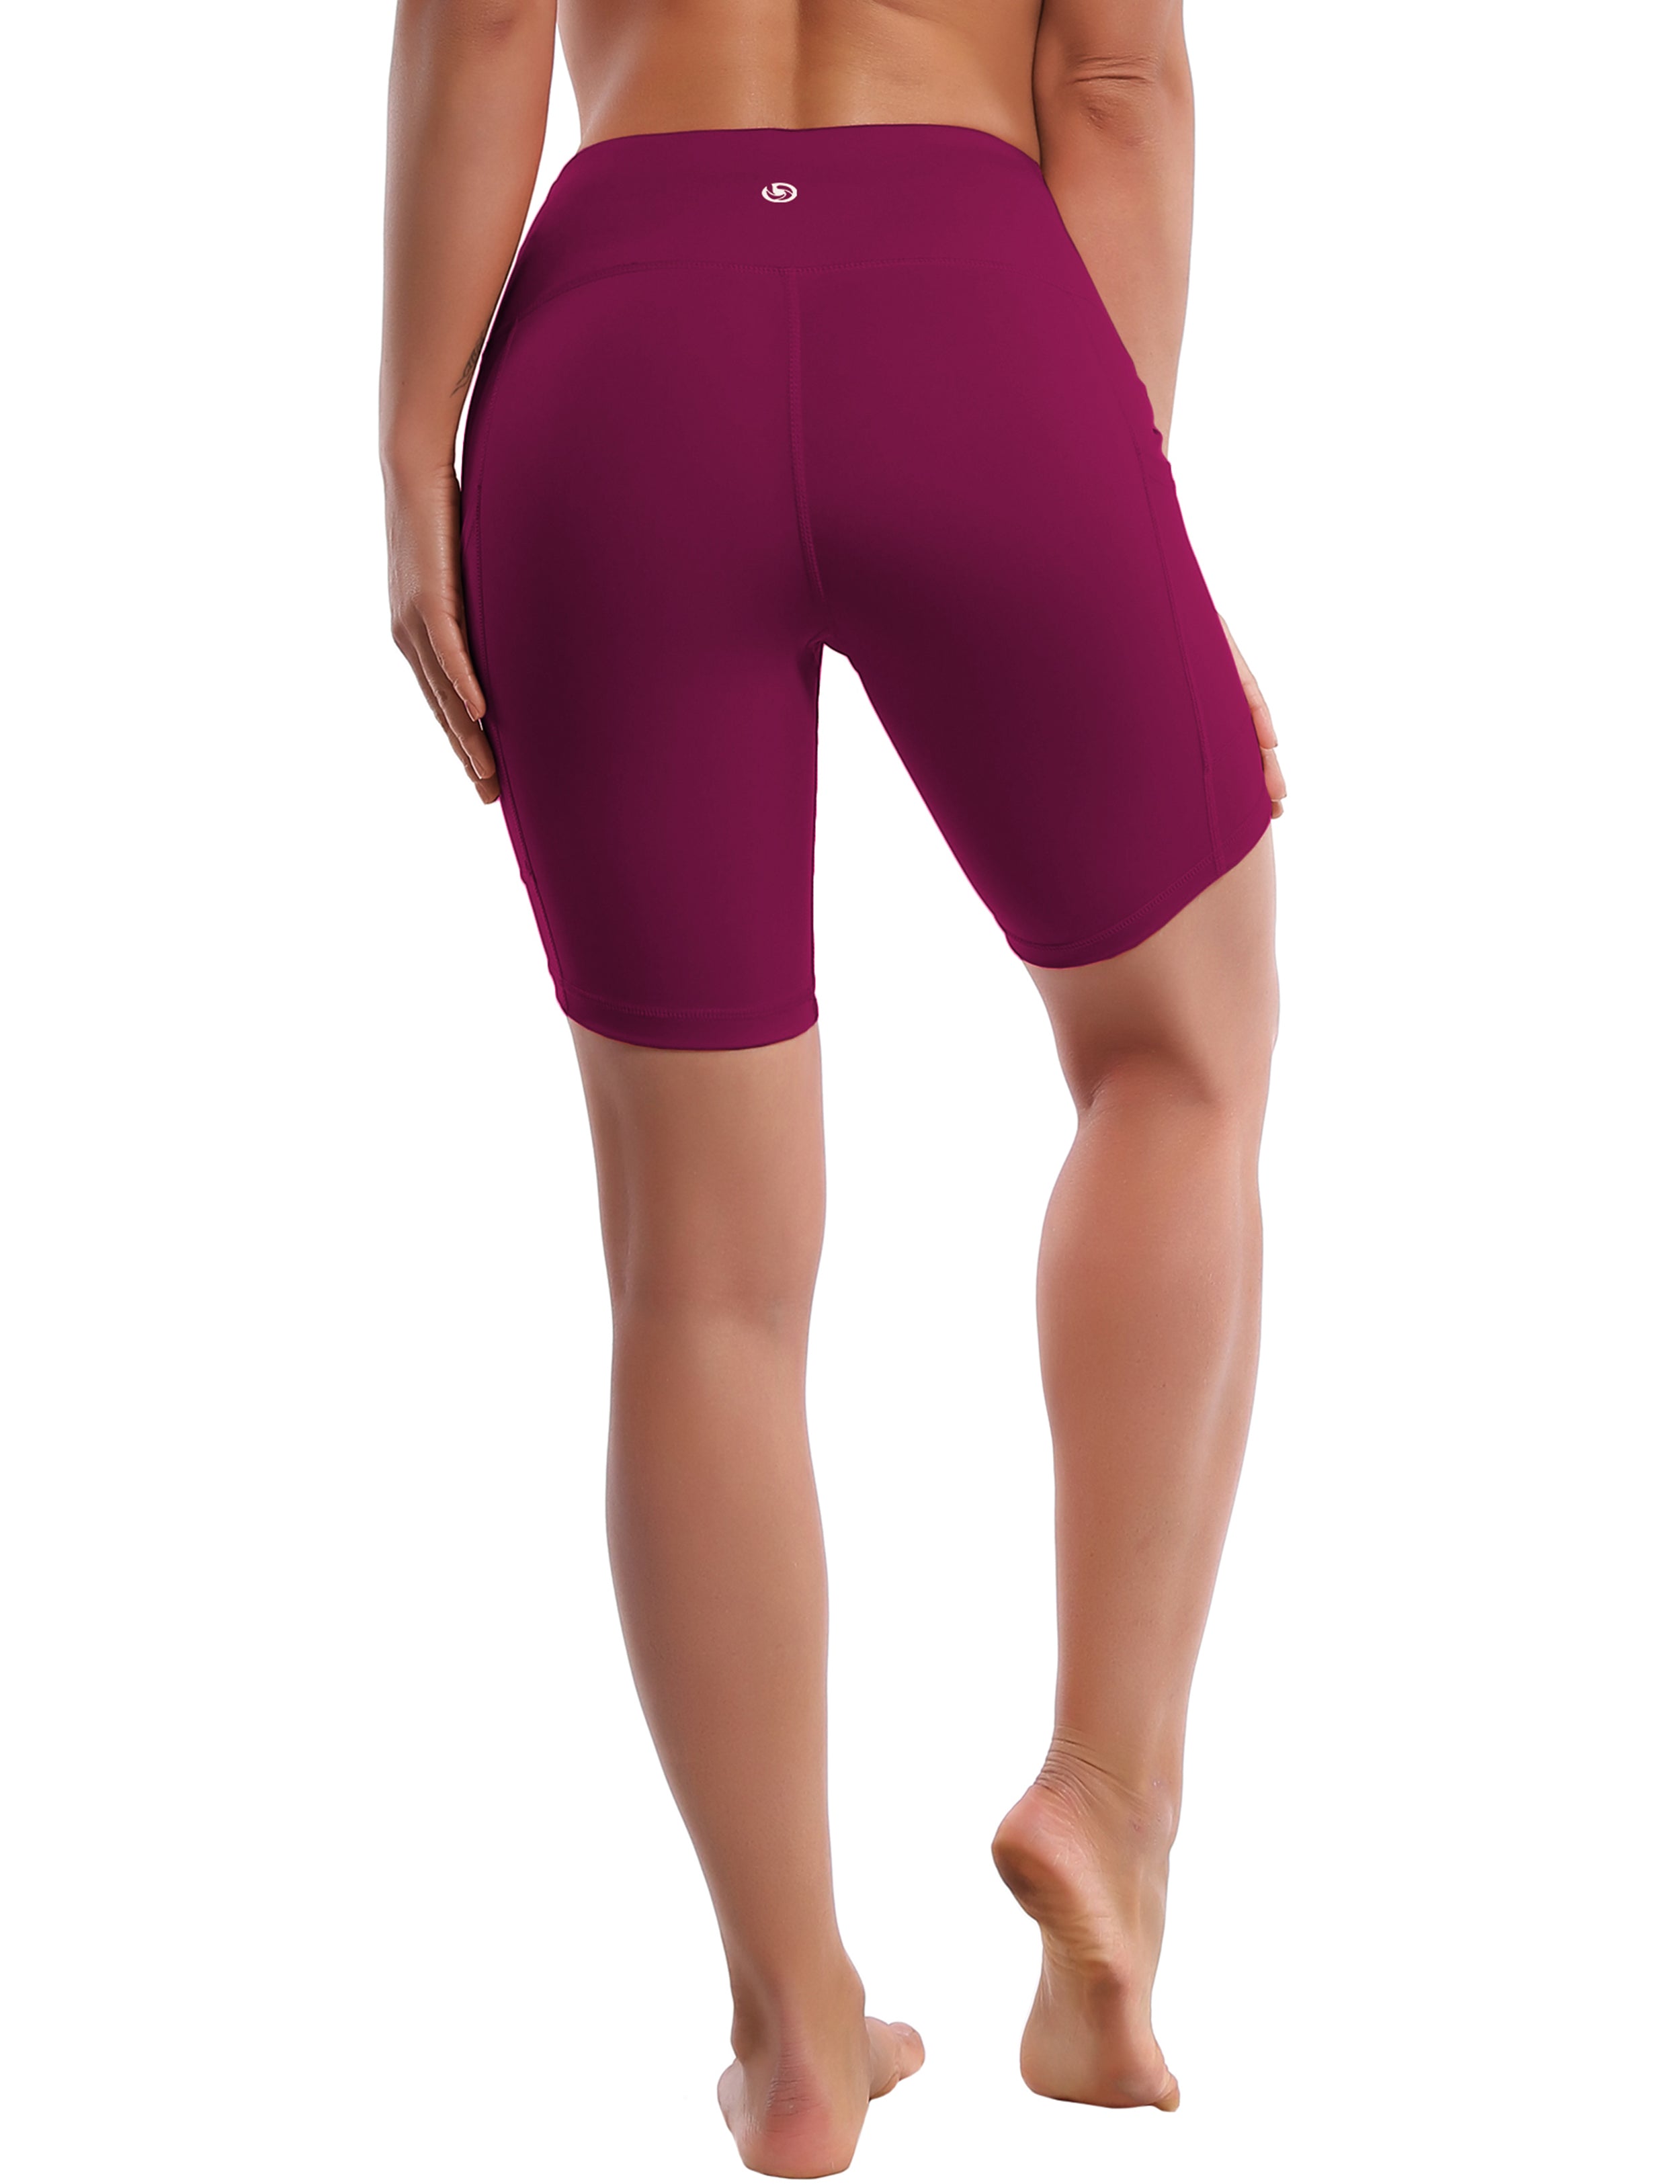 8" Side Pockets Biking Shorts grapevine Sleek, soft, smooth and totally comfortable: our newest style is here. Softest-ever fabric High elasticity High density 4-way stretch Fabric doesn't attract lint easily No see-through Moisture-wicking Machine wash 75% Nylon, 25% Spandex